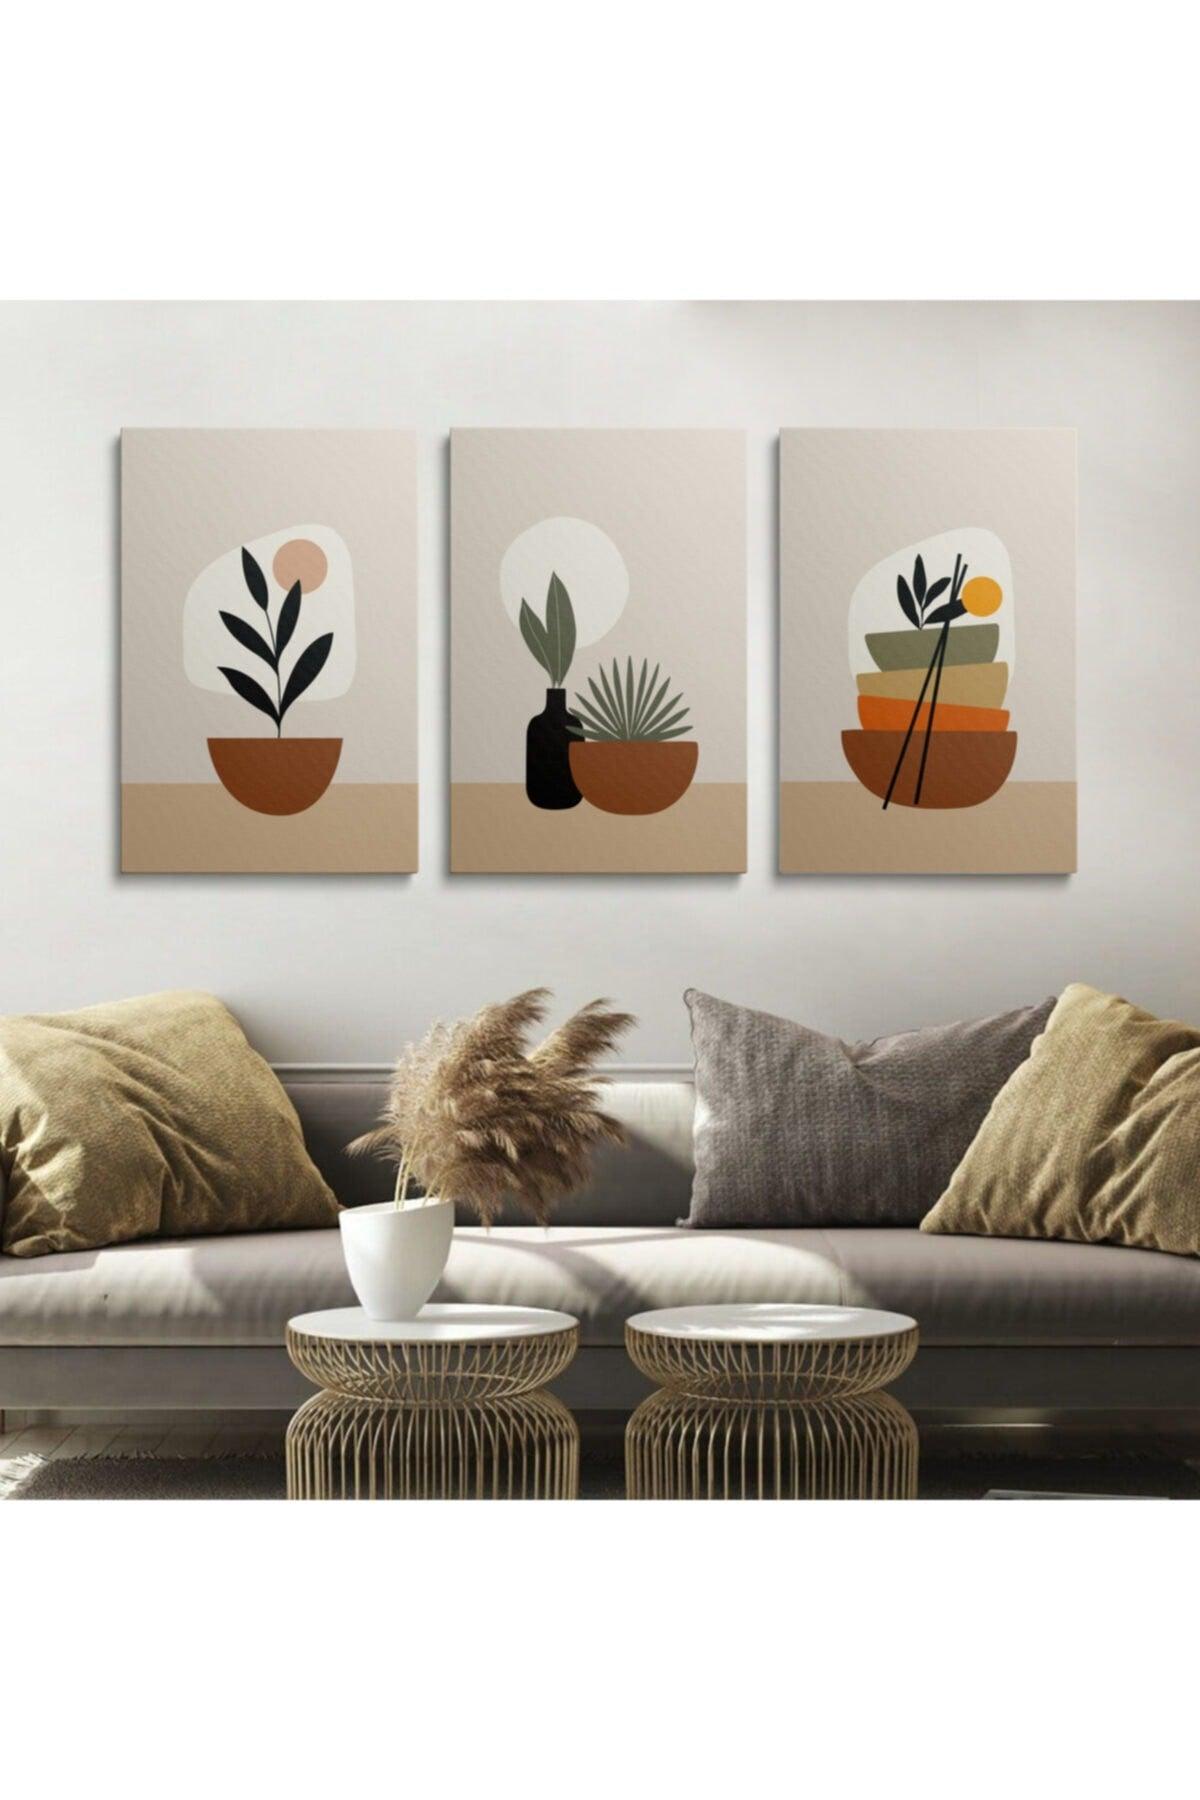 Canvas Wall Painting Boho Flowers 3 Piece Canvas Painting Set - Swordslife